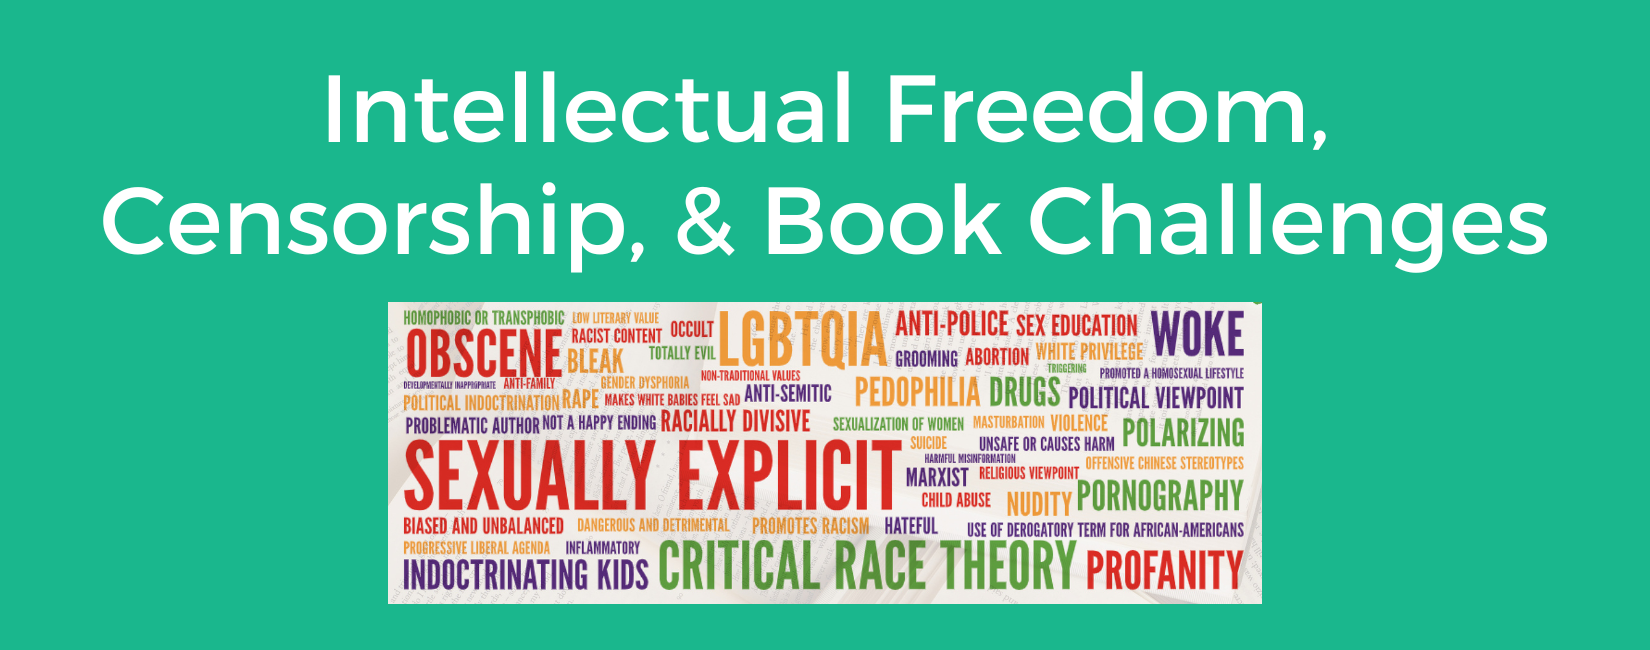 Intellectual Freedom, Censorship, and Book Challenges